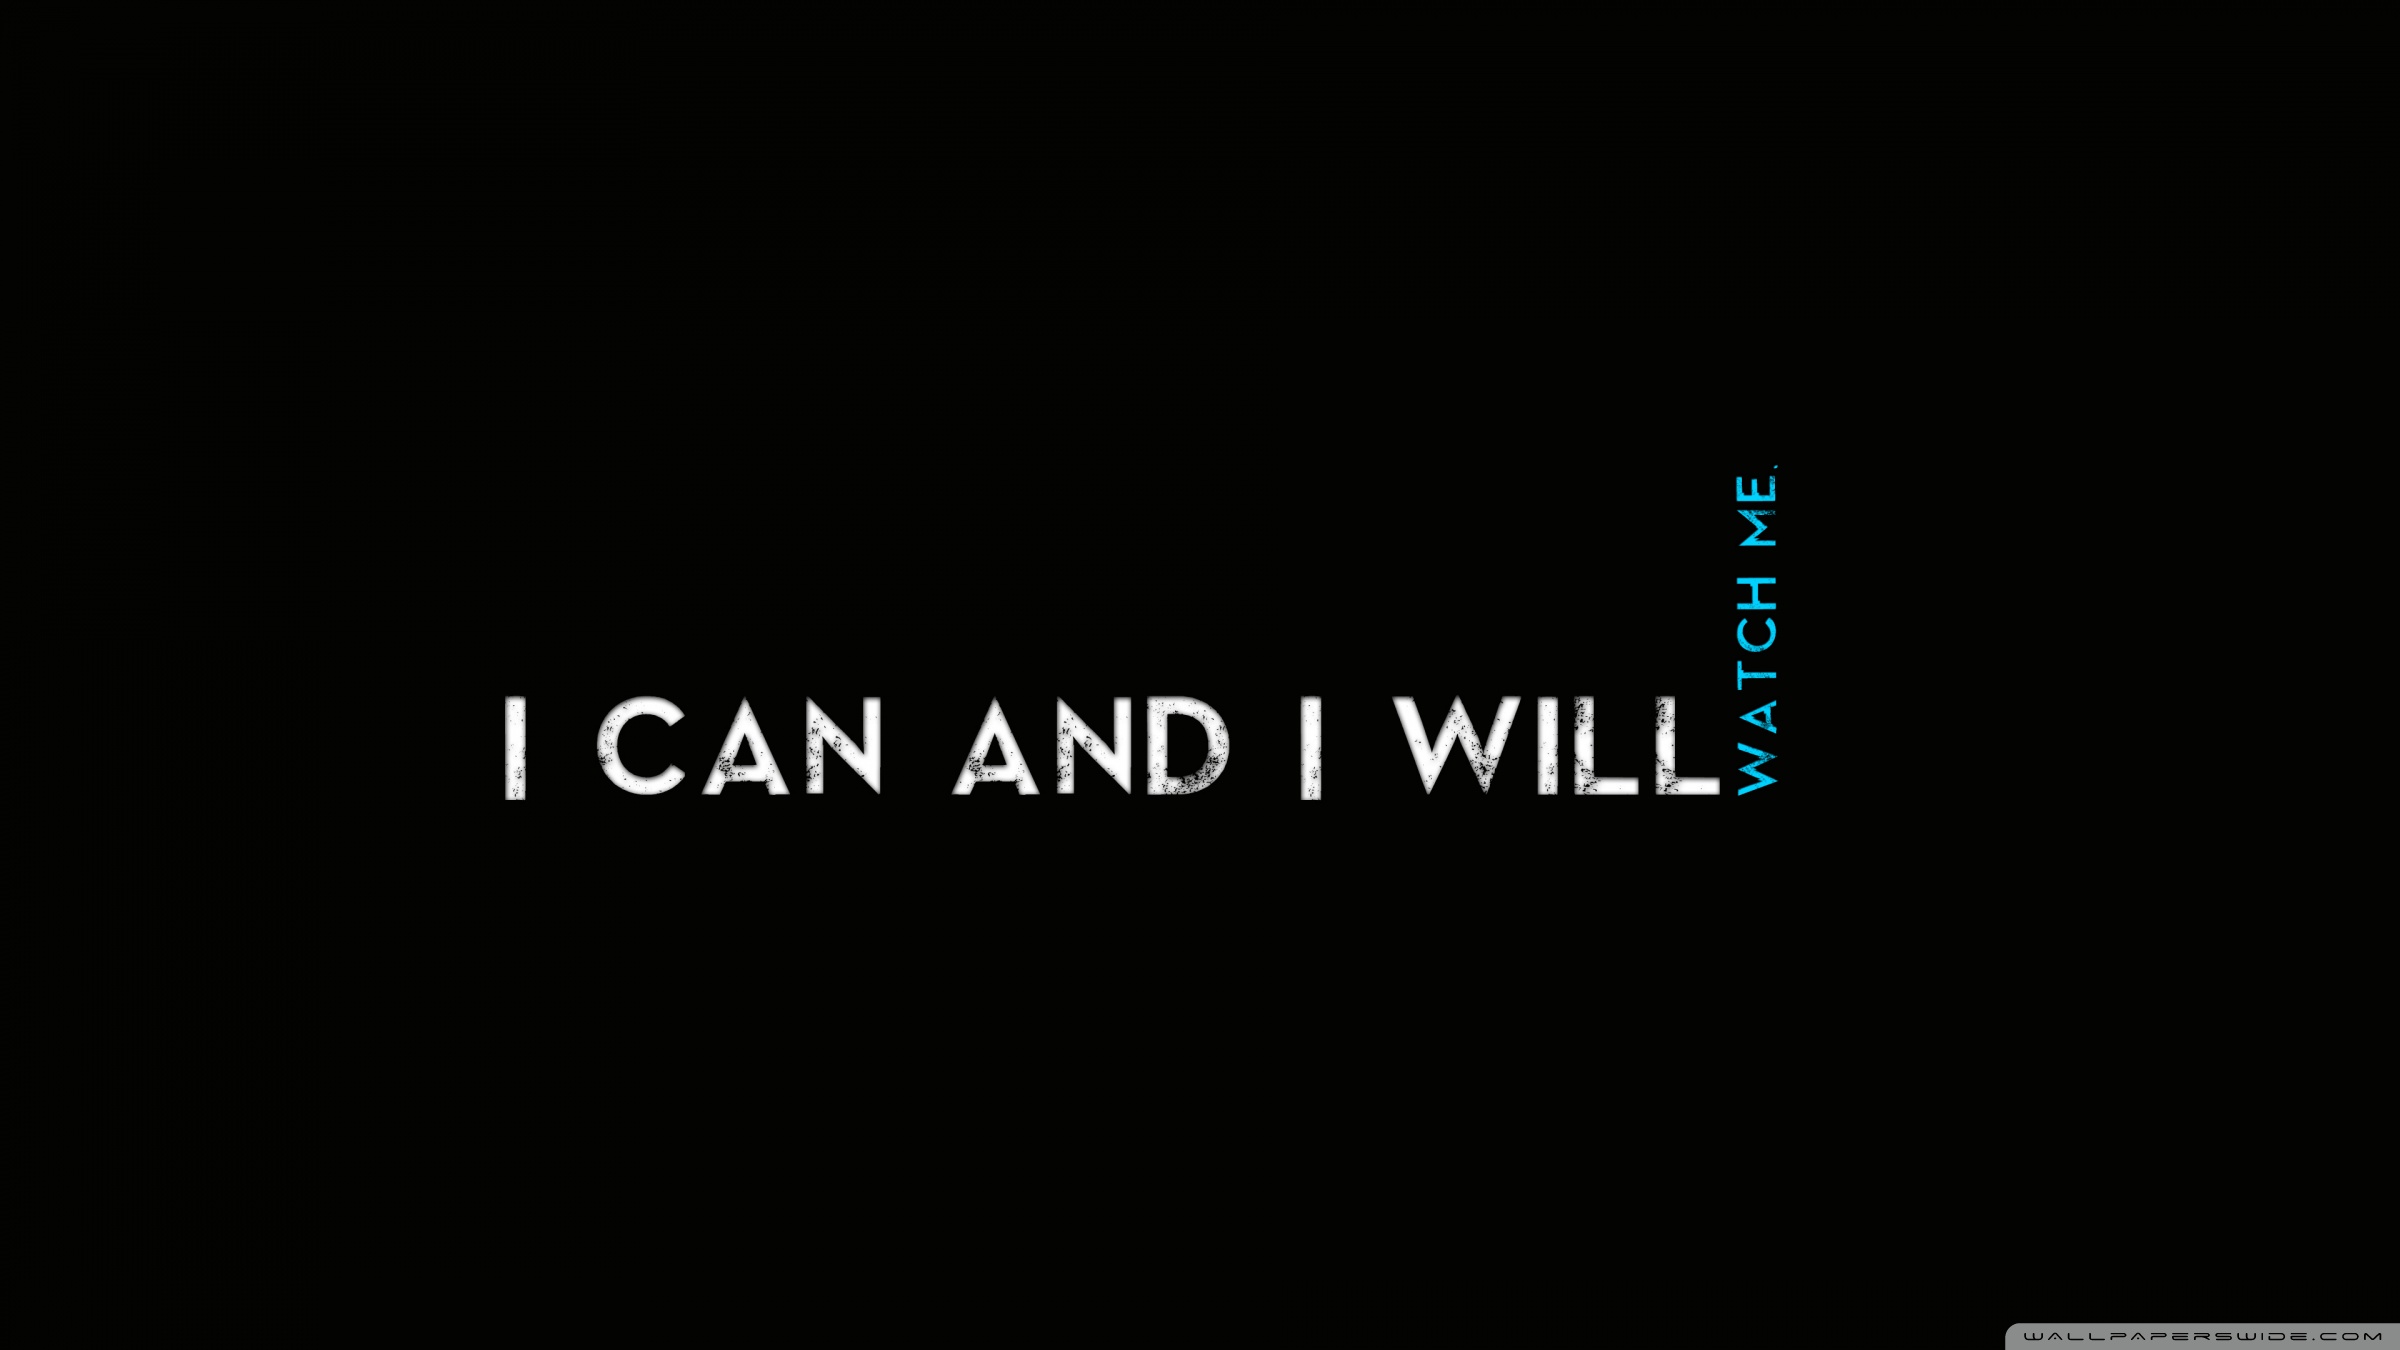 Quotes I Can And I Will Ultra Hd Desktop Background Wallpaper For 4k Uhd Tv Widescreen Ultrawide Desktop Laptop Multi Display Dual Monitor Tablet Smartphone